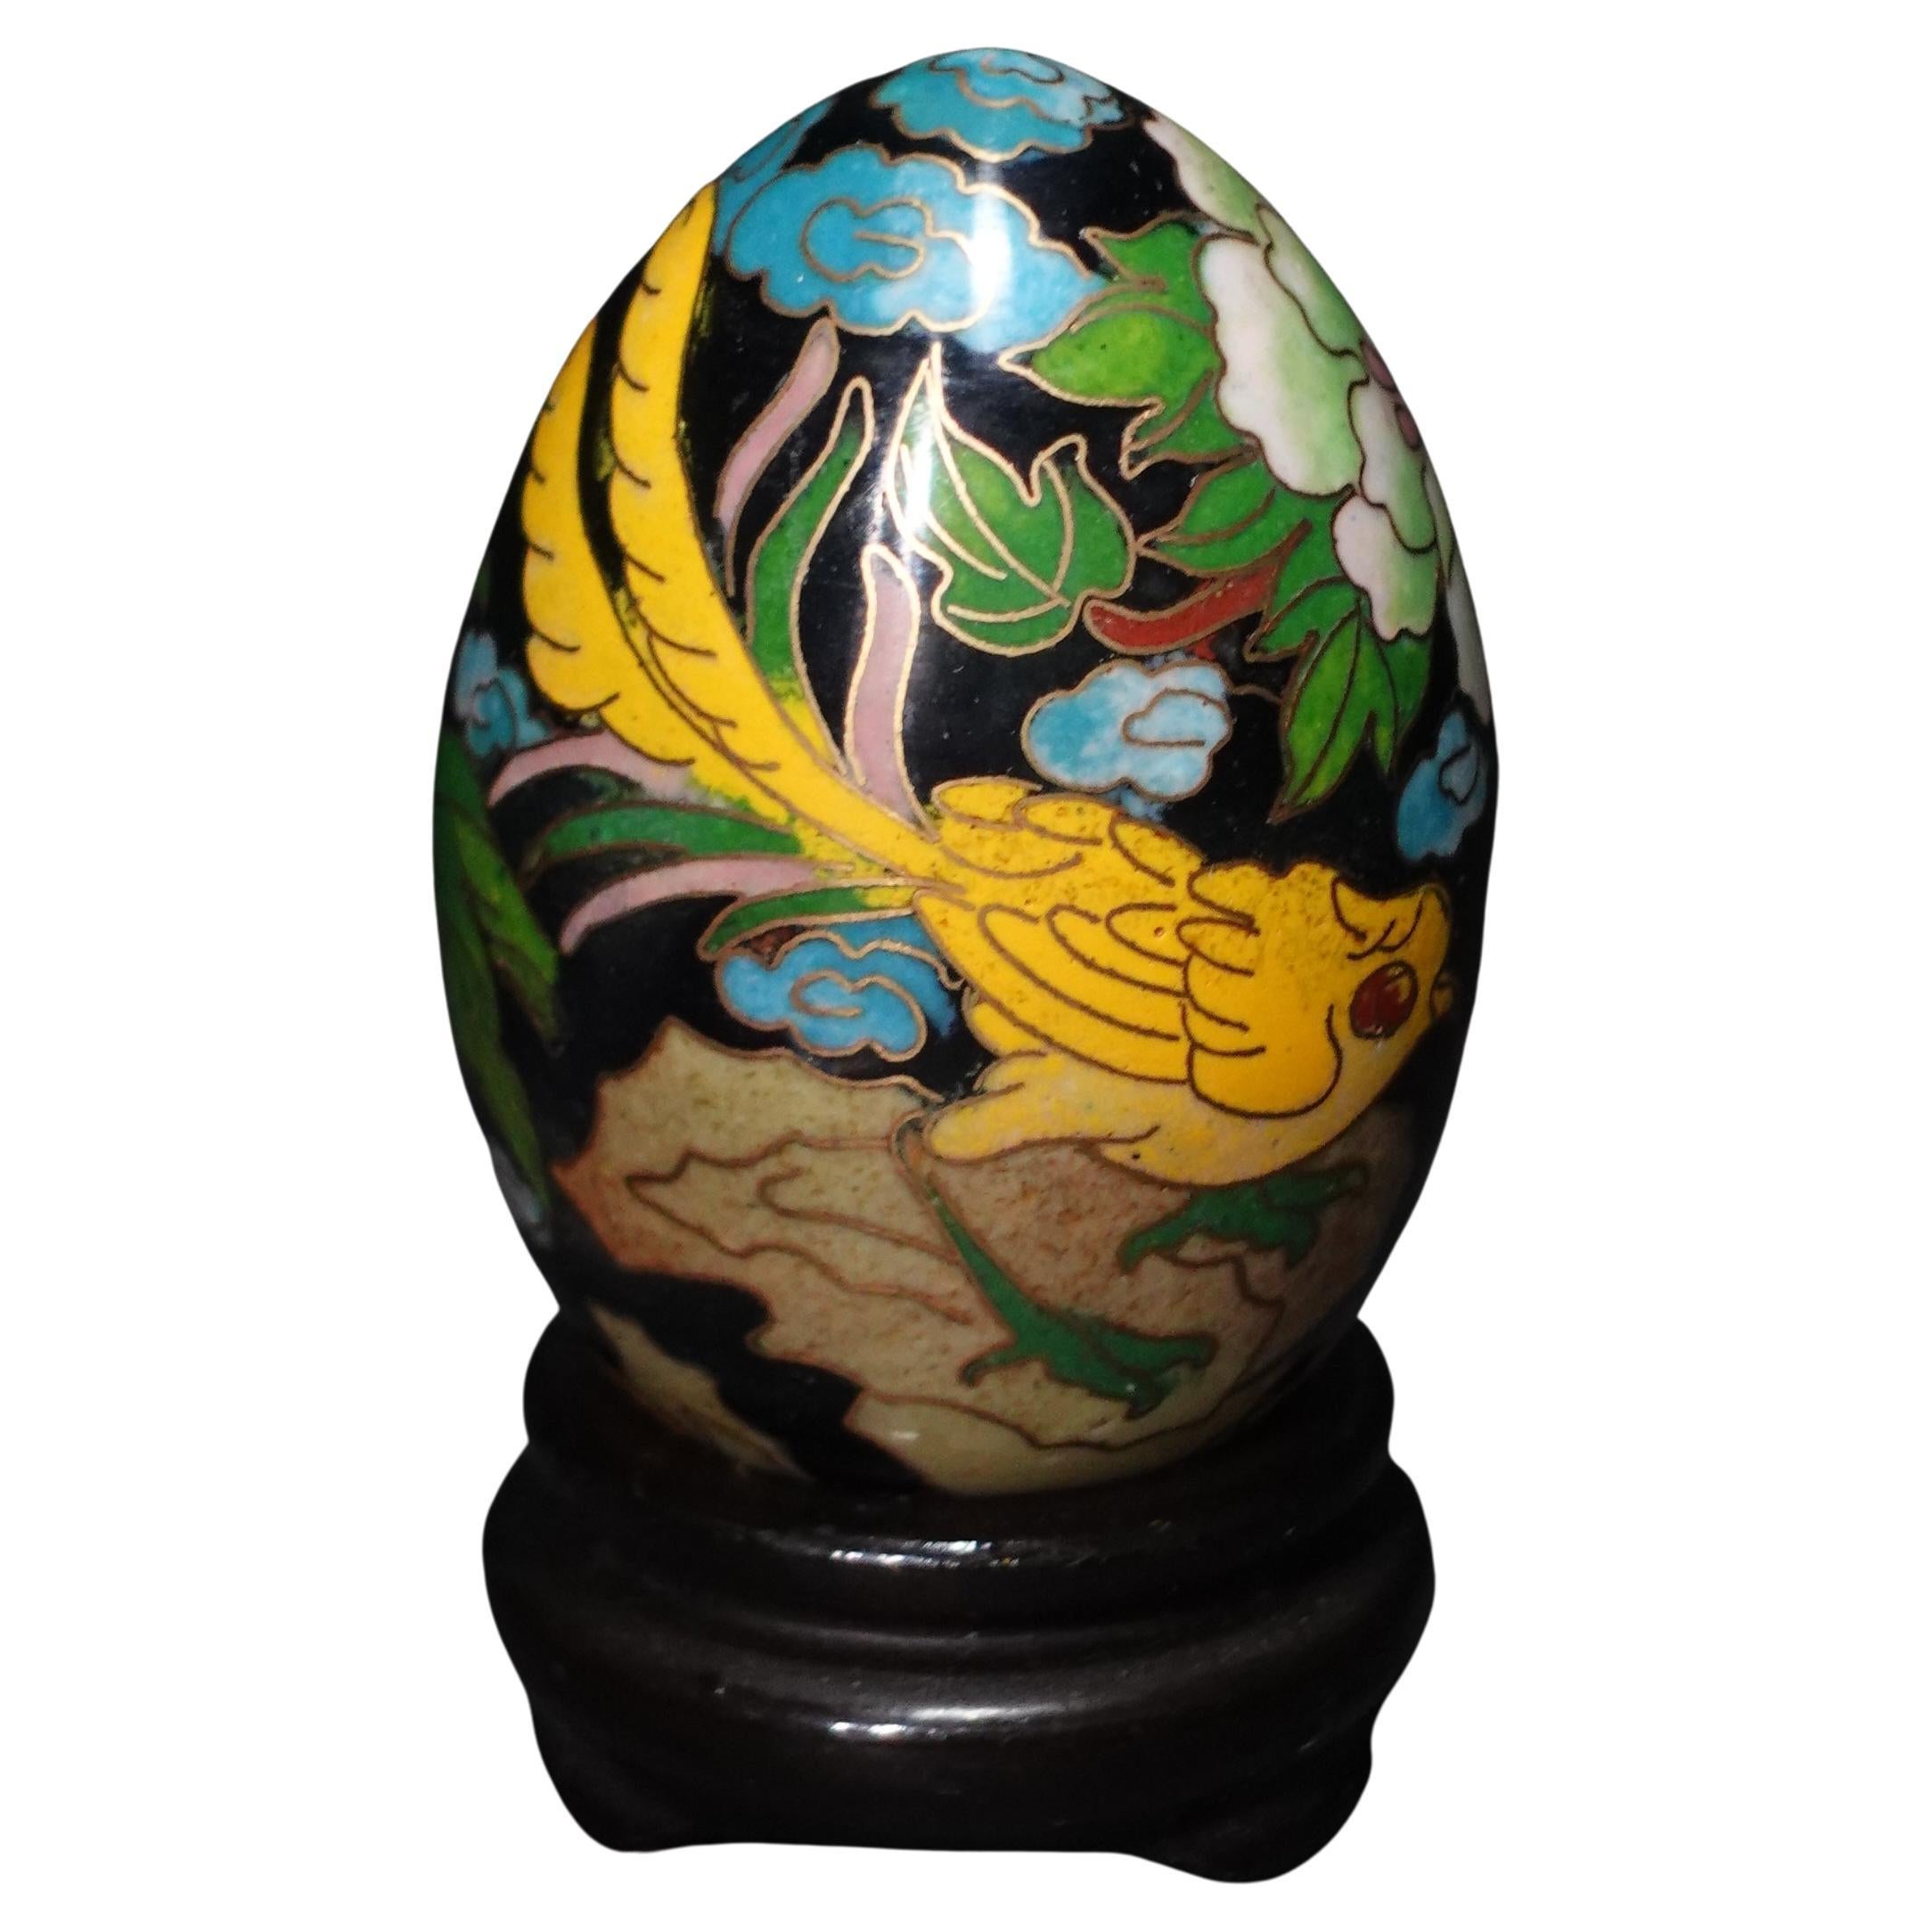 Chinese Cloisonné Enamel Egg "Flowers and Bird" with Wood Stand #7 For Sale